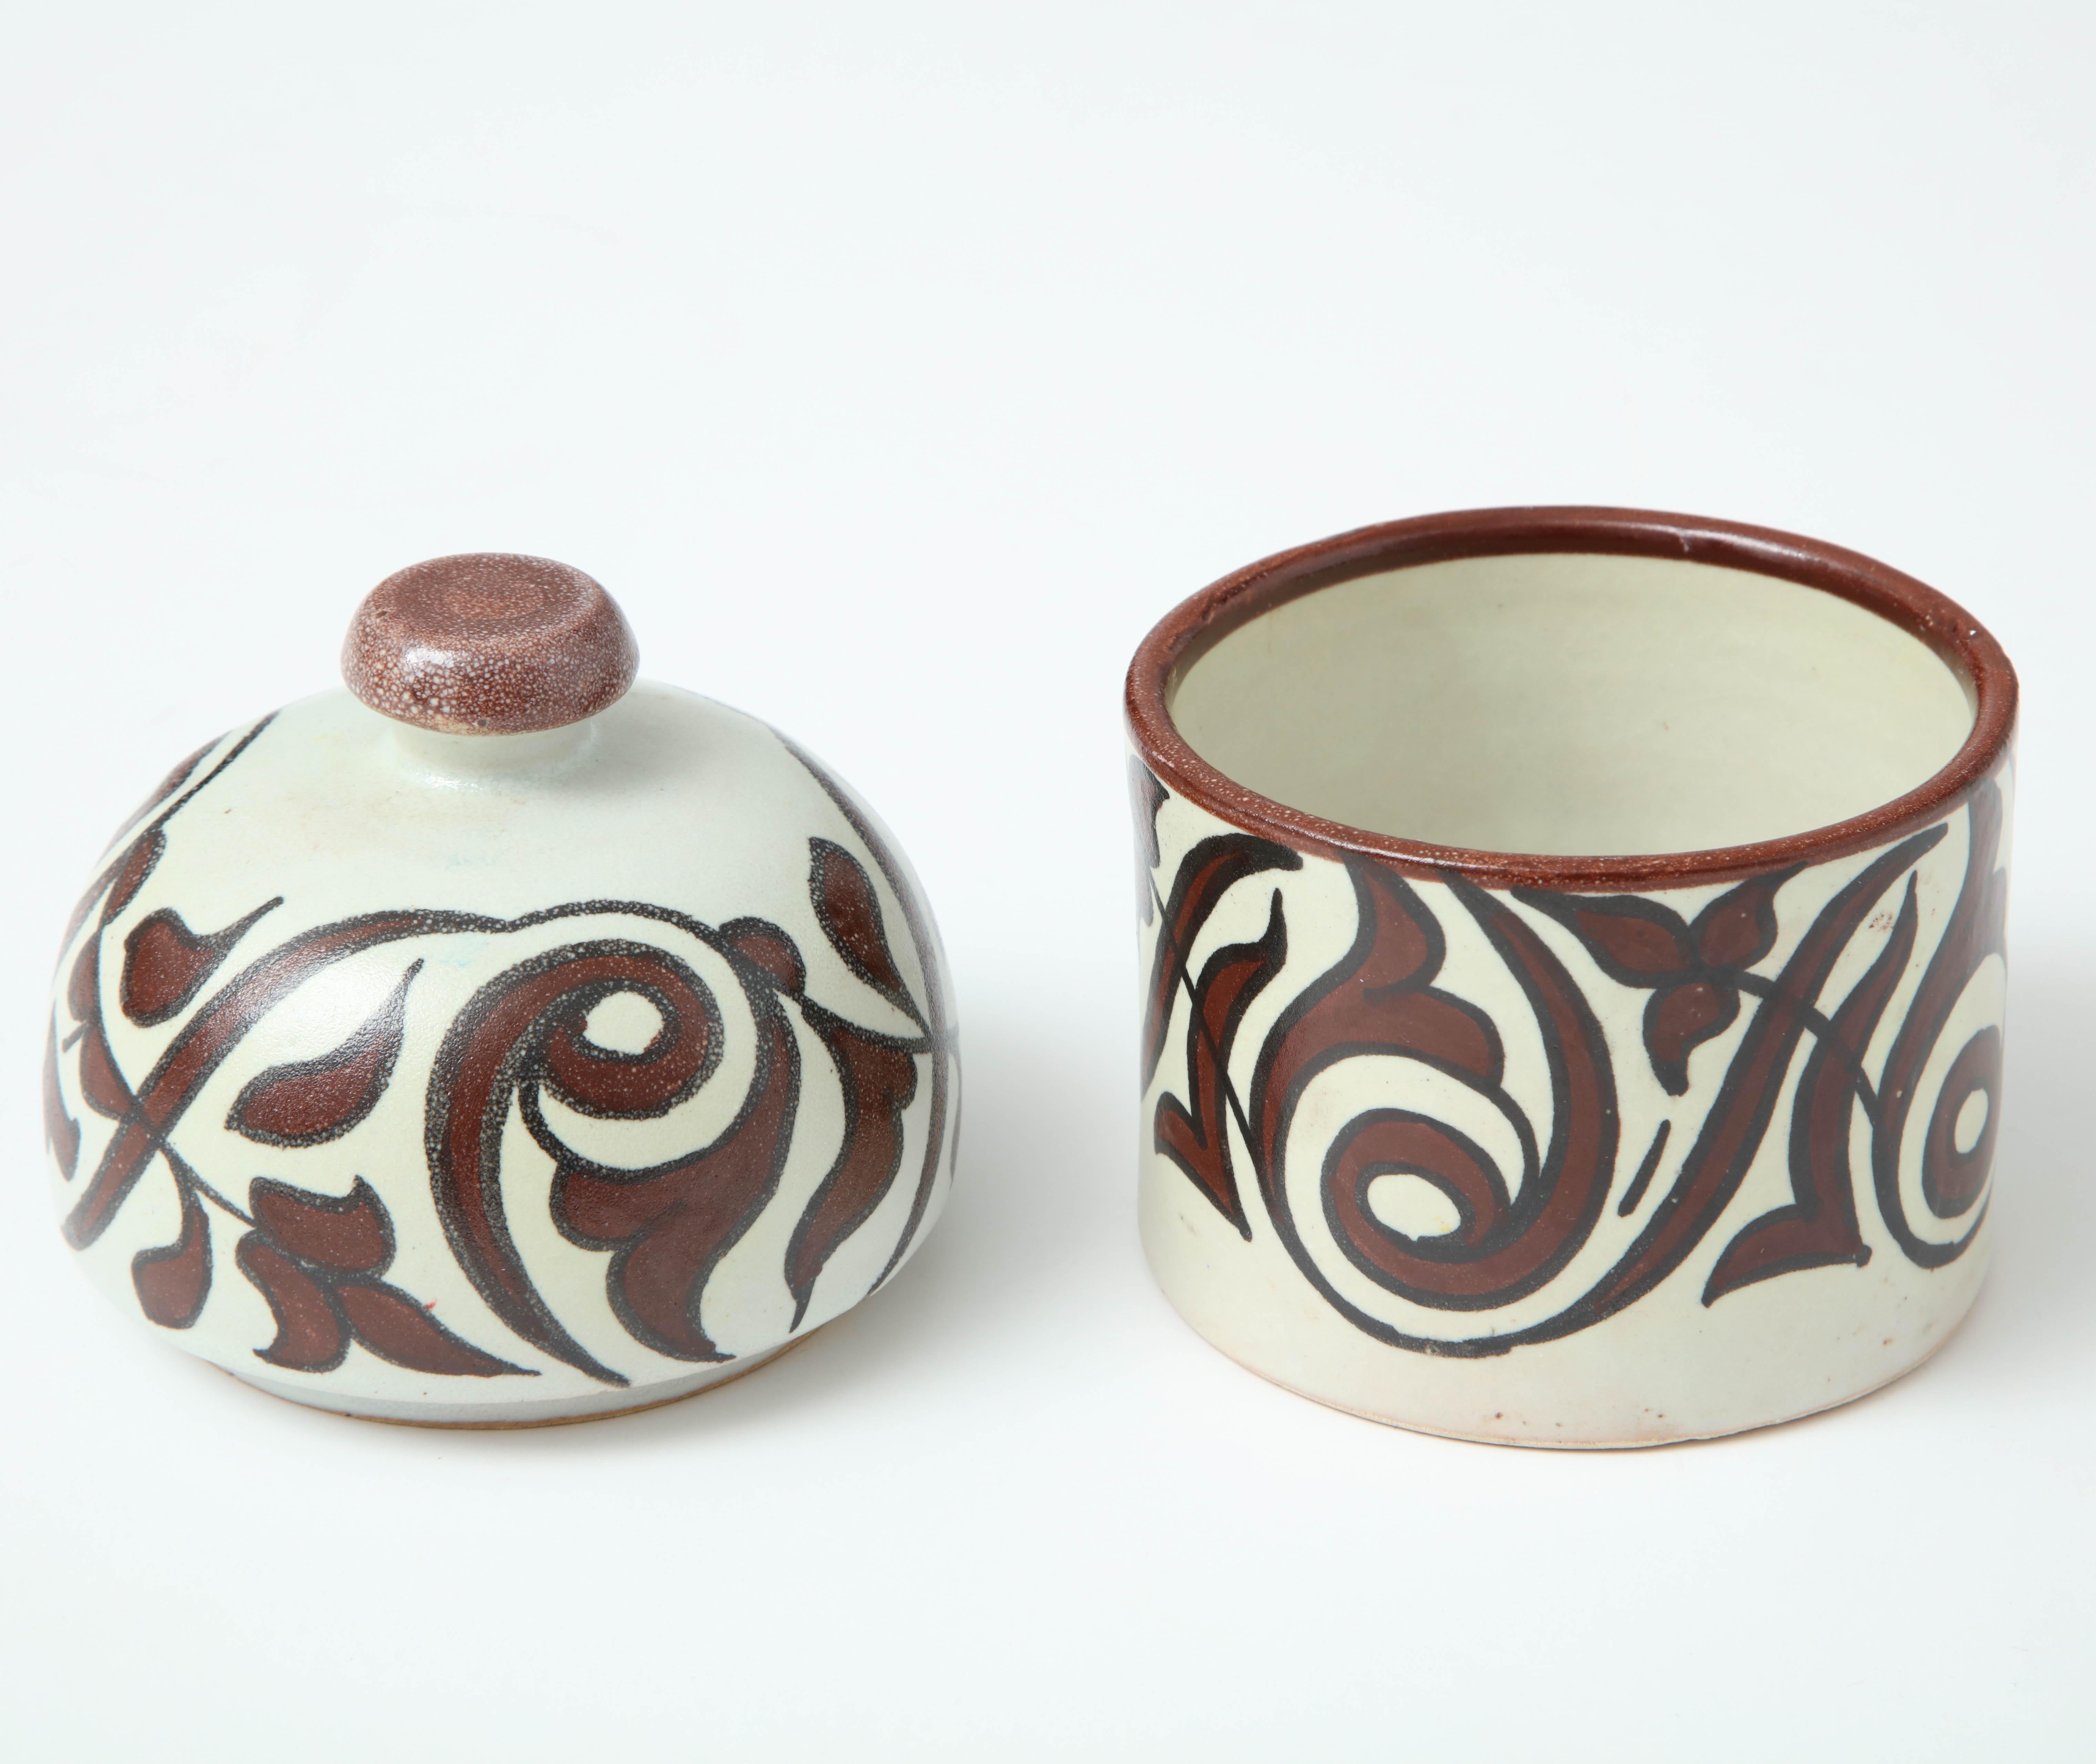 Hand-Crafted Pottery from Morocco, Cream & Burgundy Color, Handcrafted, Contemporary Ceramic For Sale